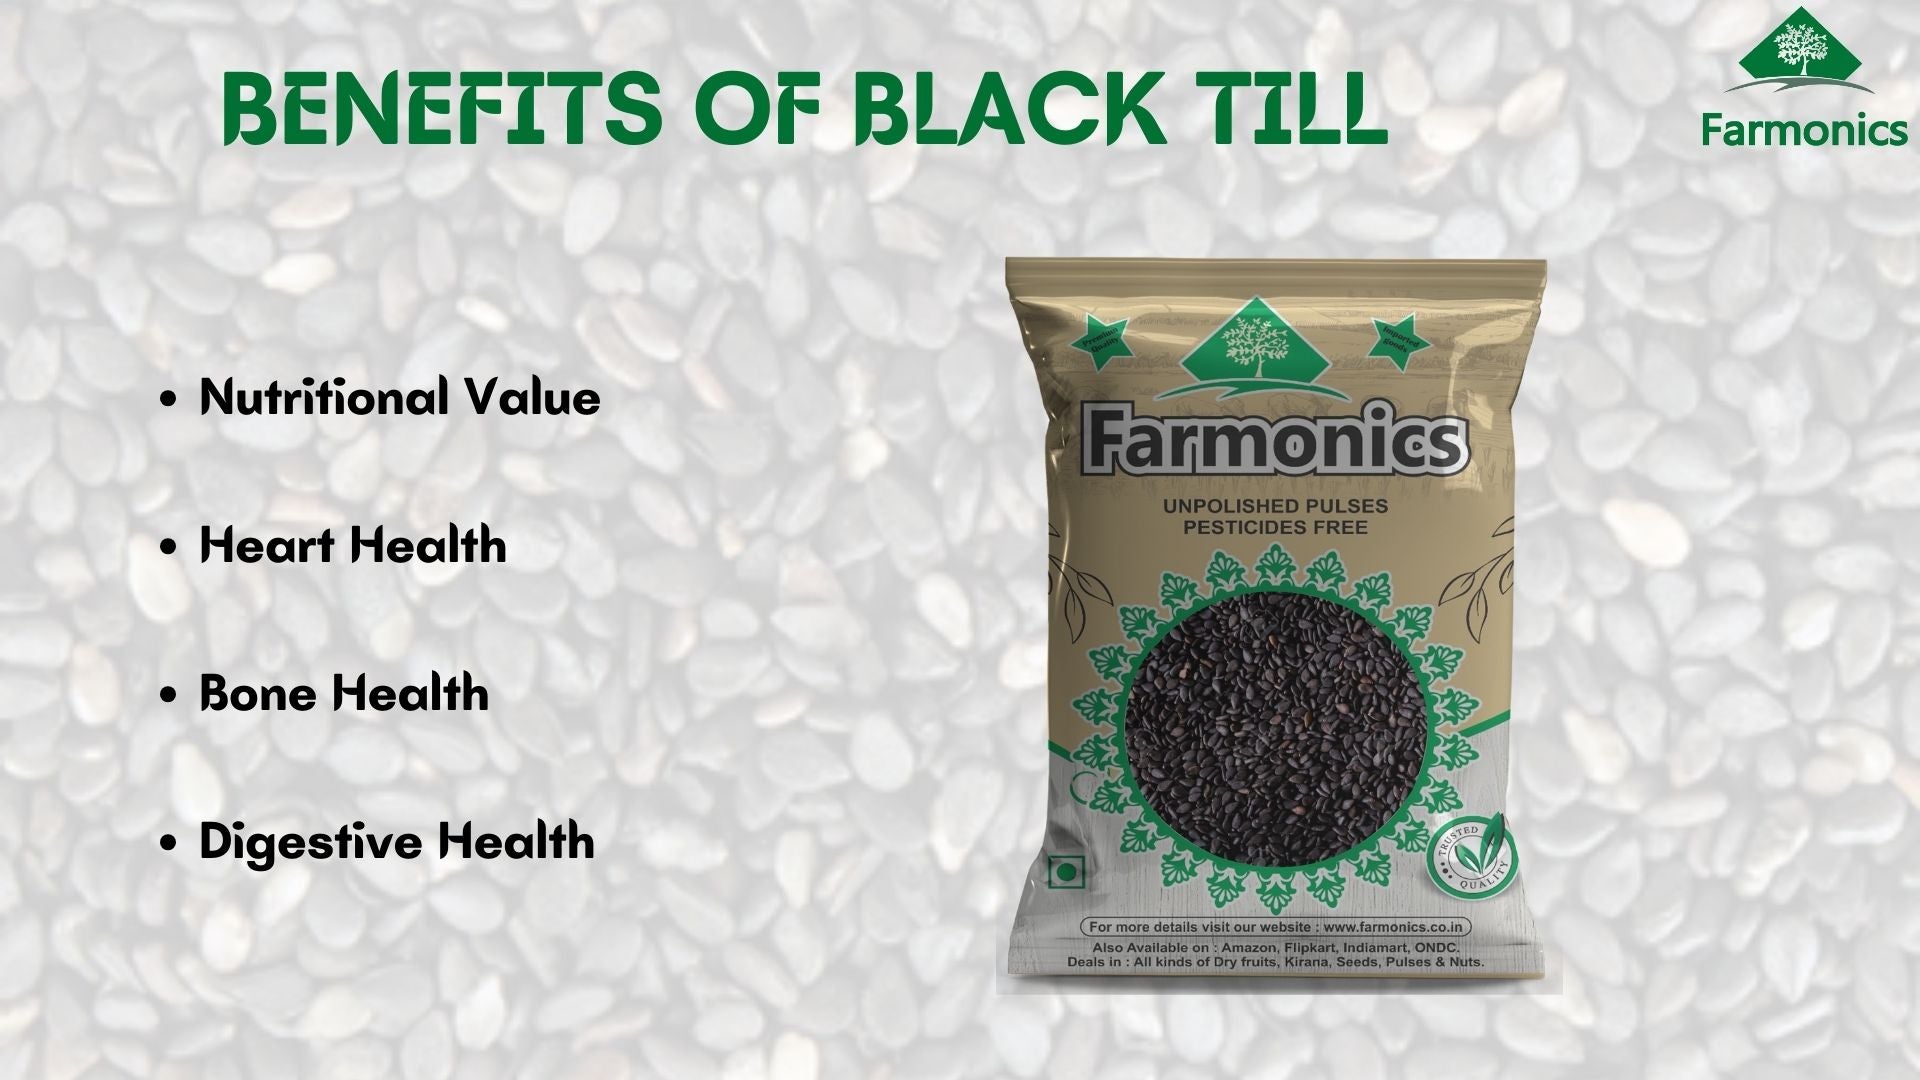 Benefiits you can avail from Farmonics Black til